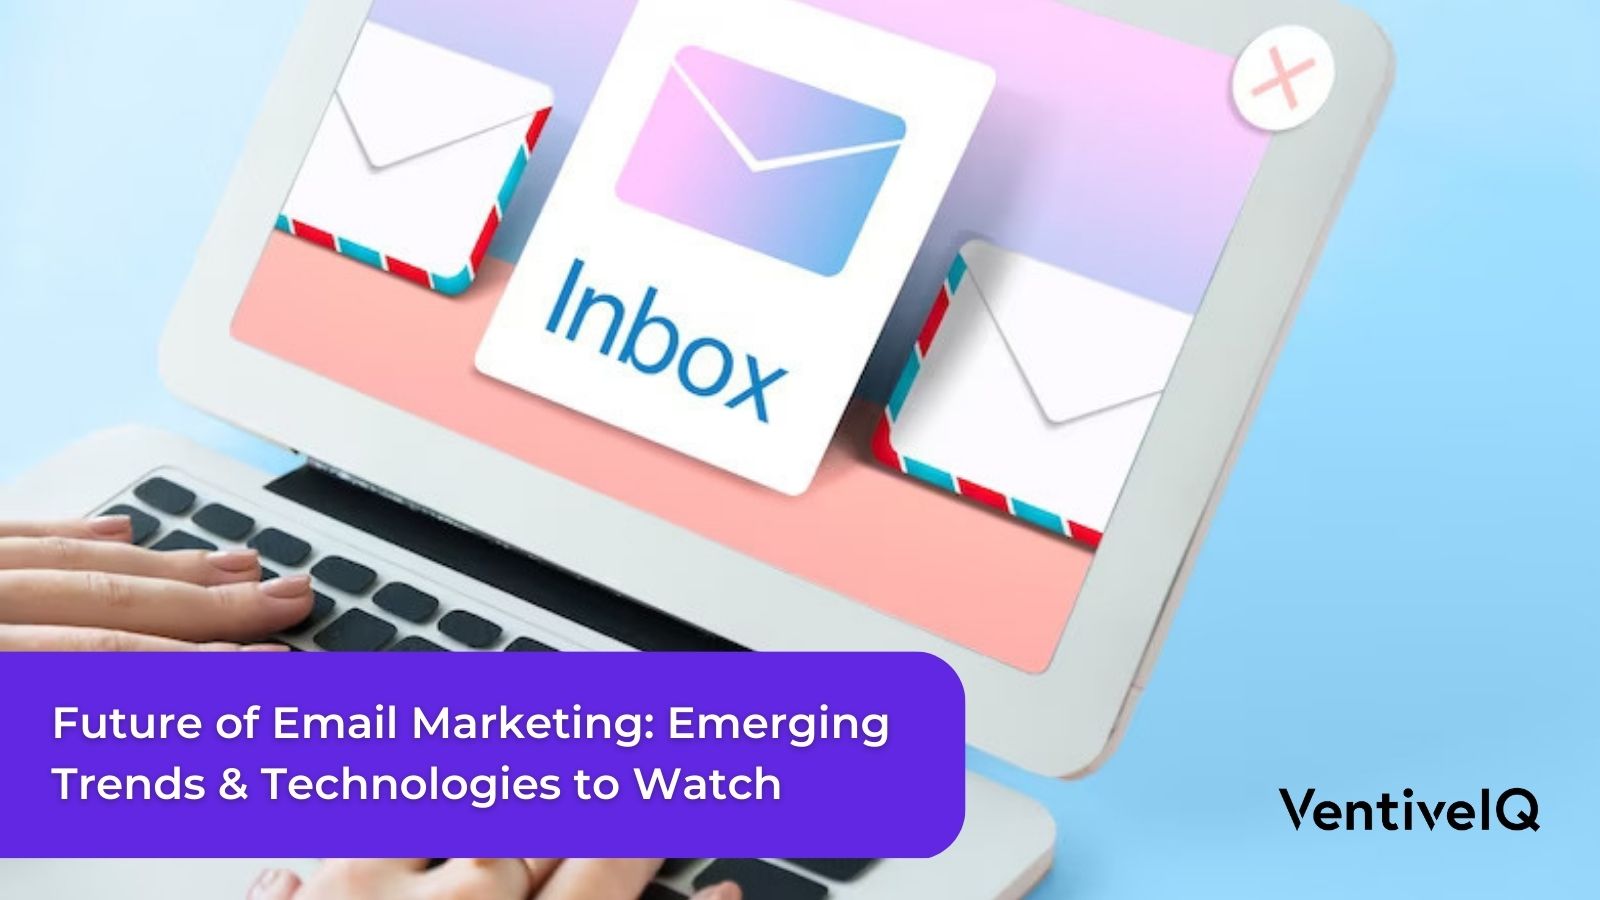 The Future of Email Marketing: Emerging Trends and Technologies to Watch